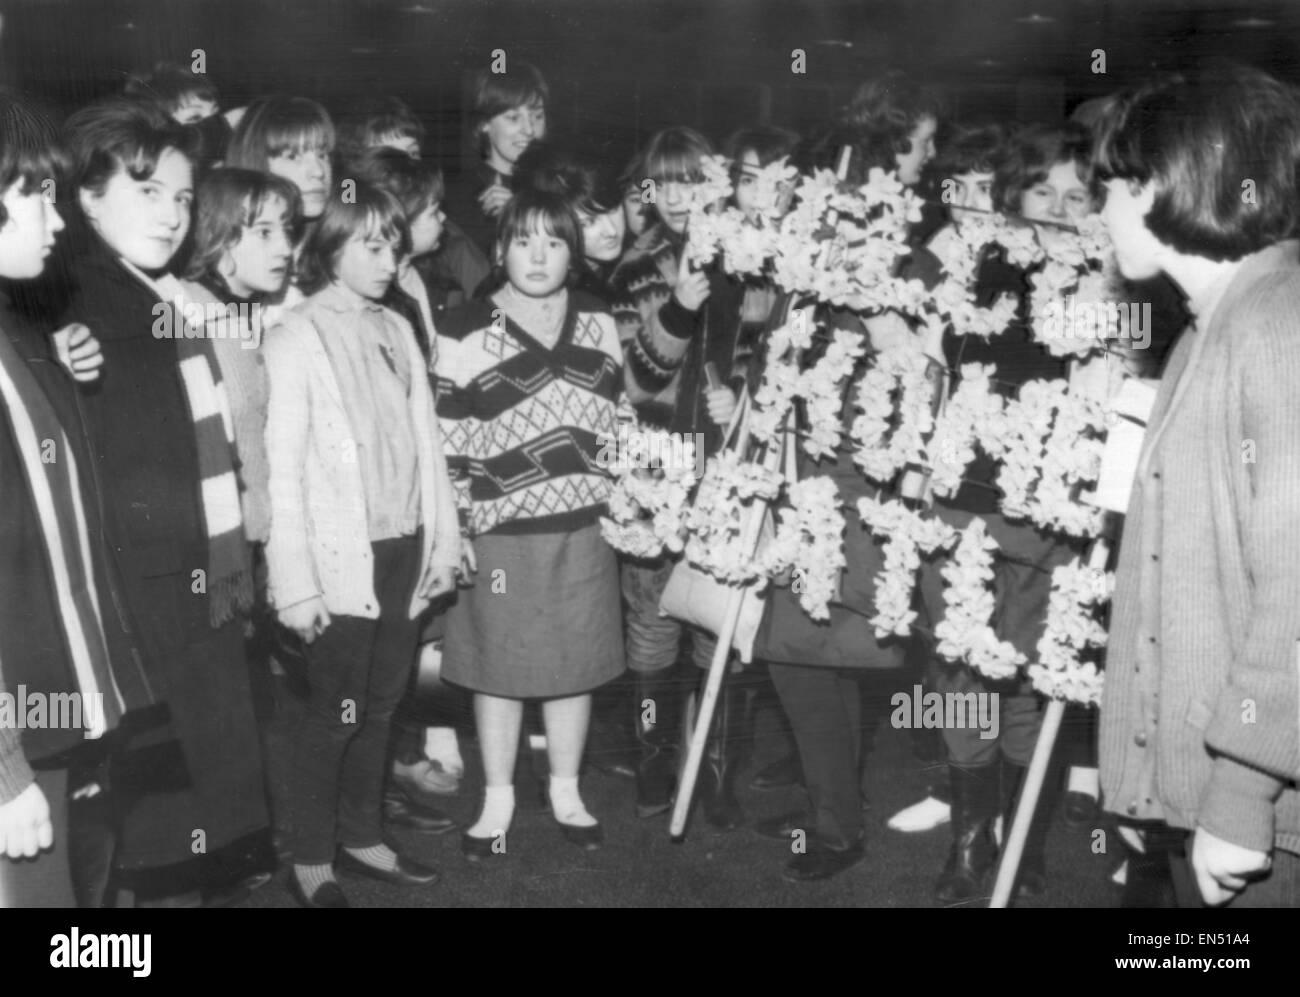 Beatles fans crowd the Queens Building roof at London Heathrow Airport in anticipation of their heroes' return Saturday 22nd February 1964. Evaluation Scan Only - If you require a high resolution copy, please contact desk@mirrorpix.com Stock Photo